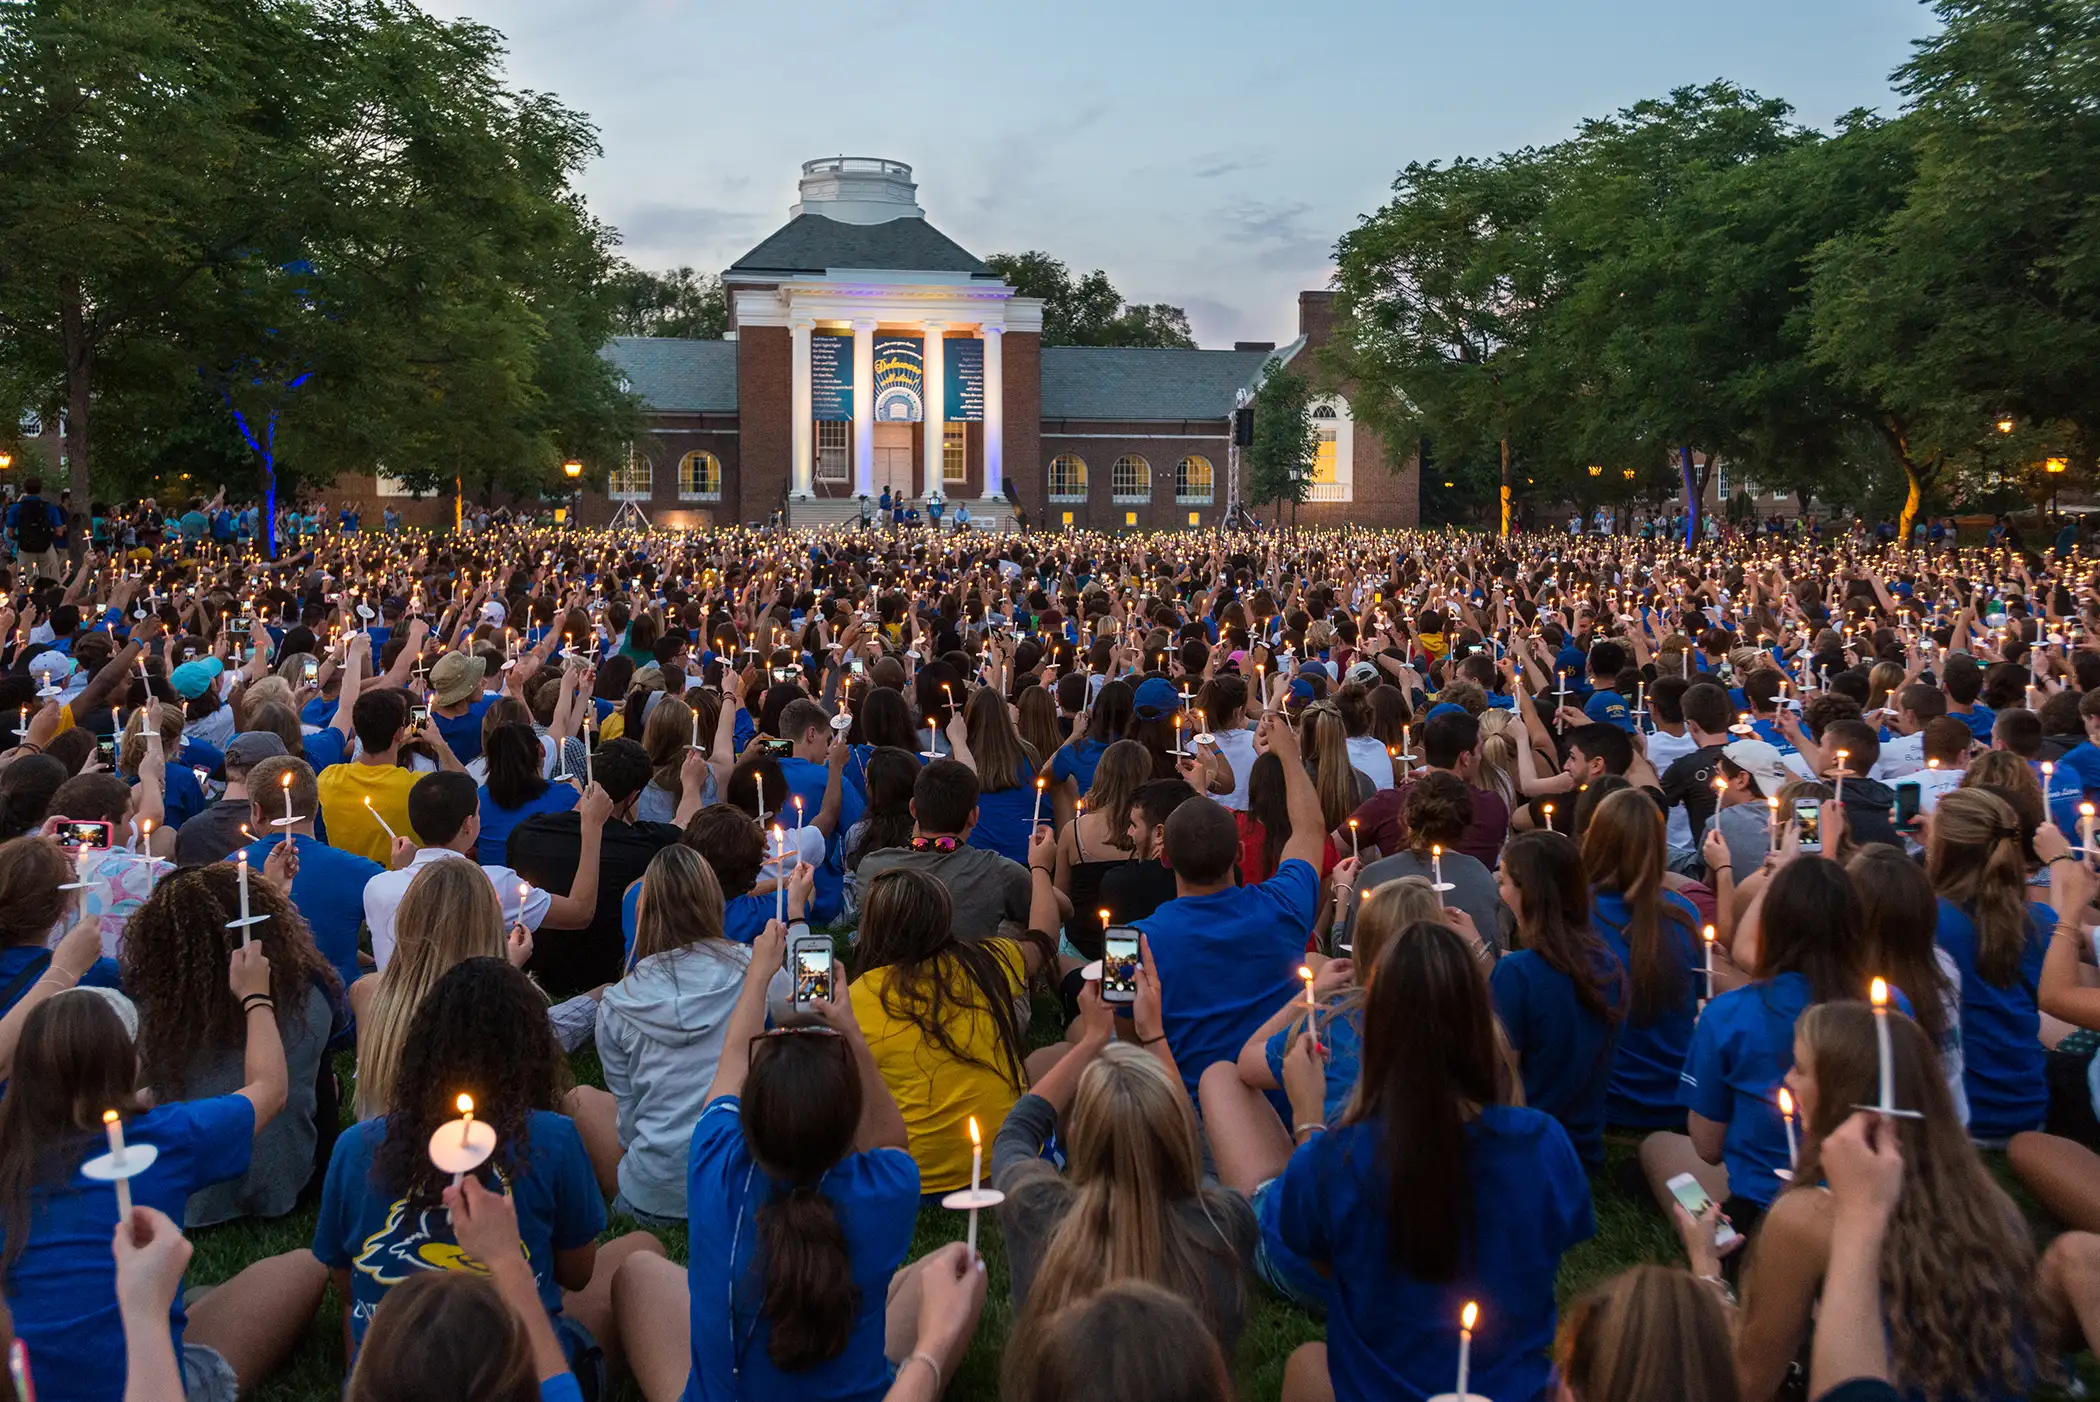 University of Delaware Class of 2018 Twilight Induction Ceremony held on the South Green on August 25, 2014.